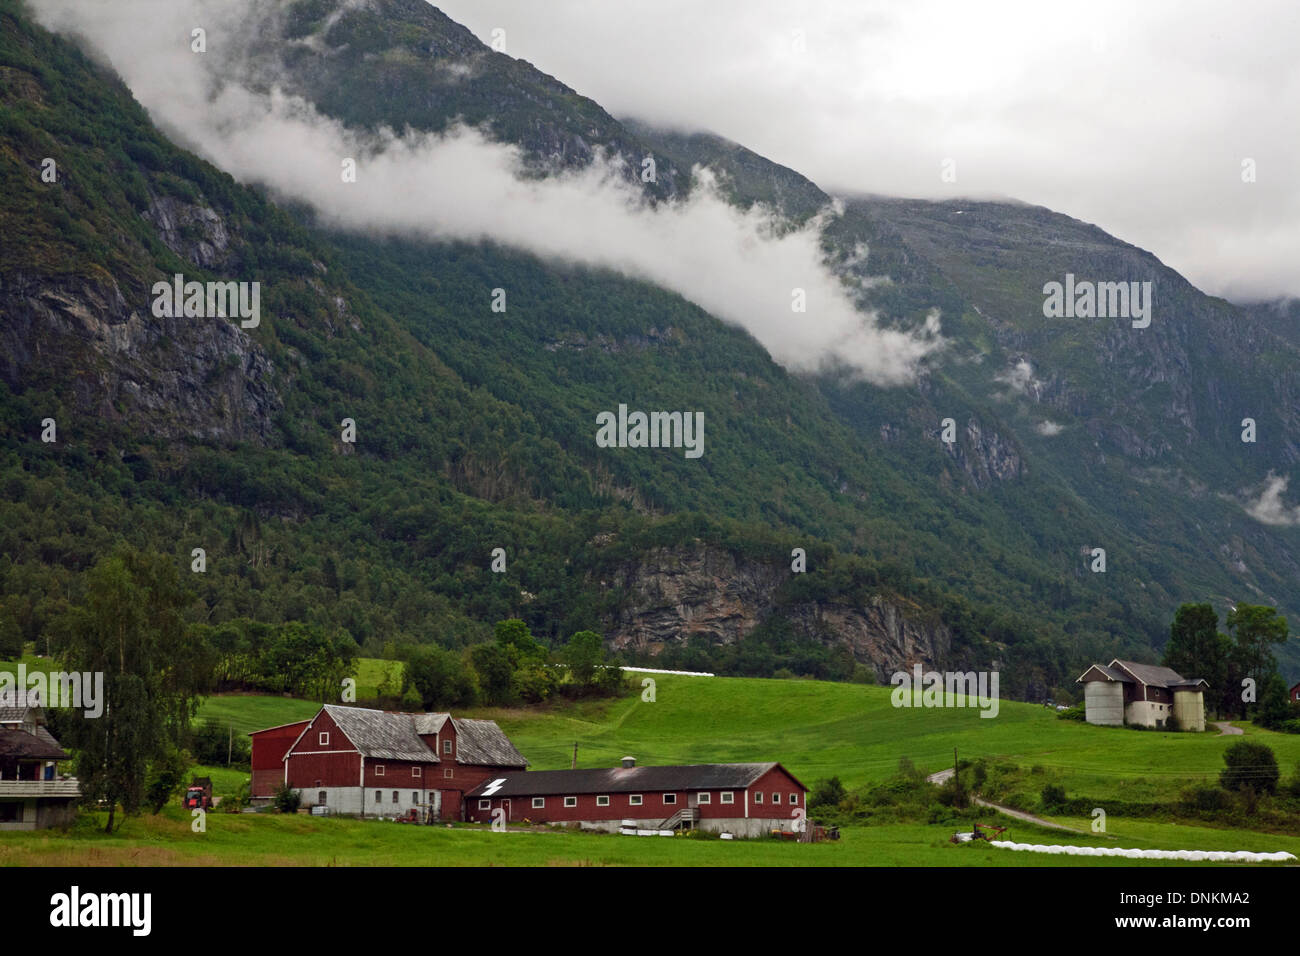 View of mountain landscape in Geiranger, Norway, Europe Stock Photo